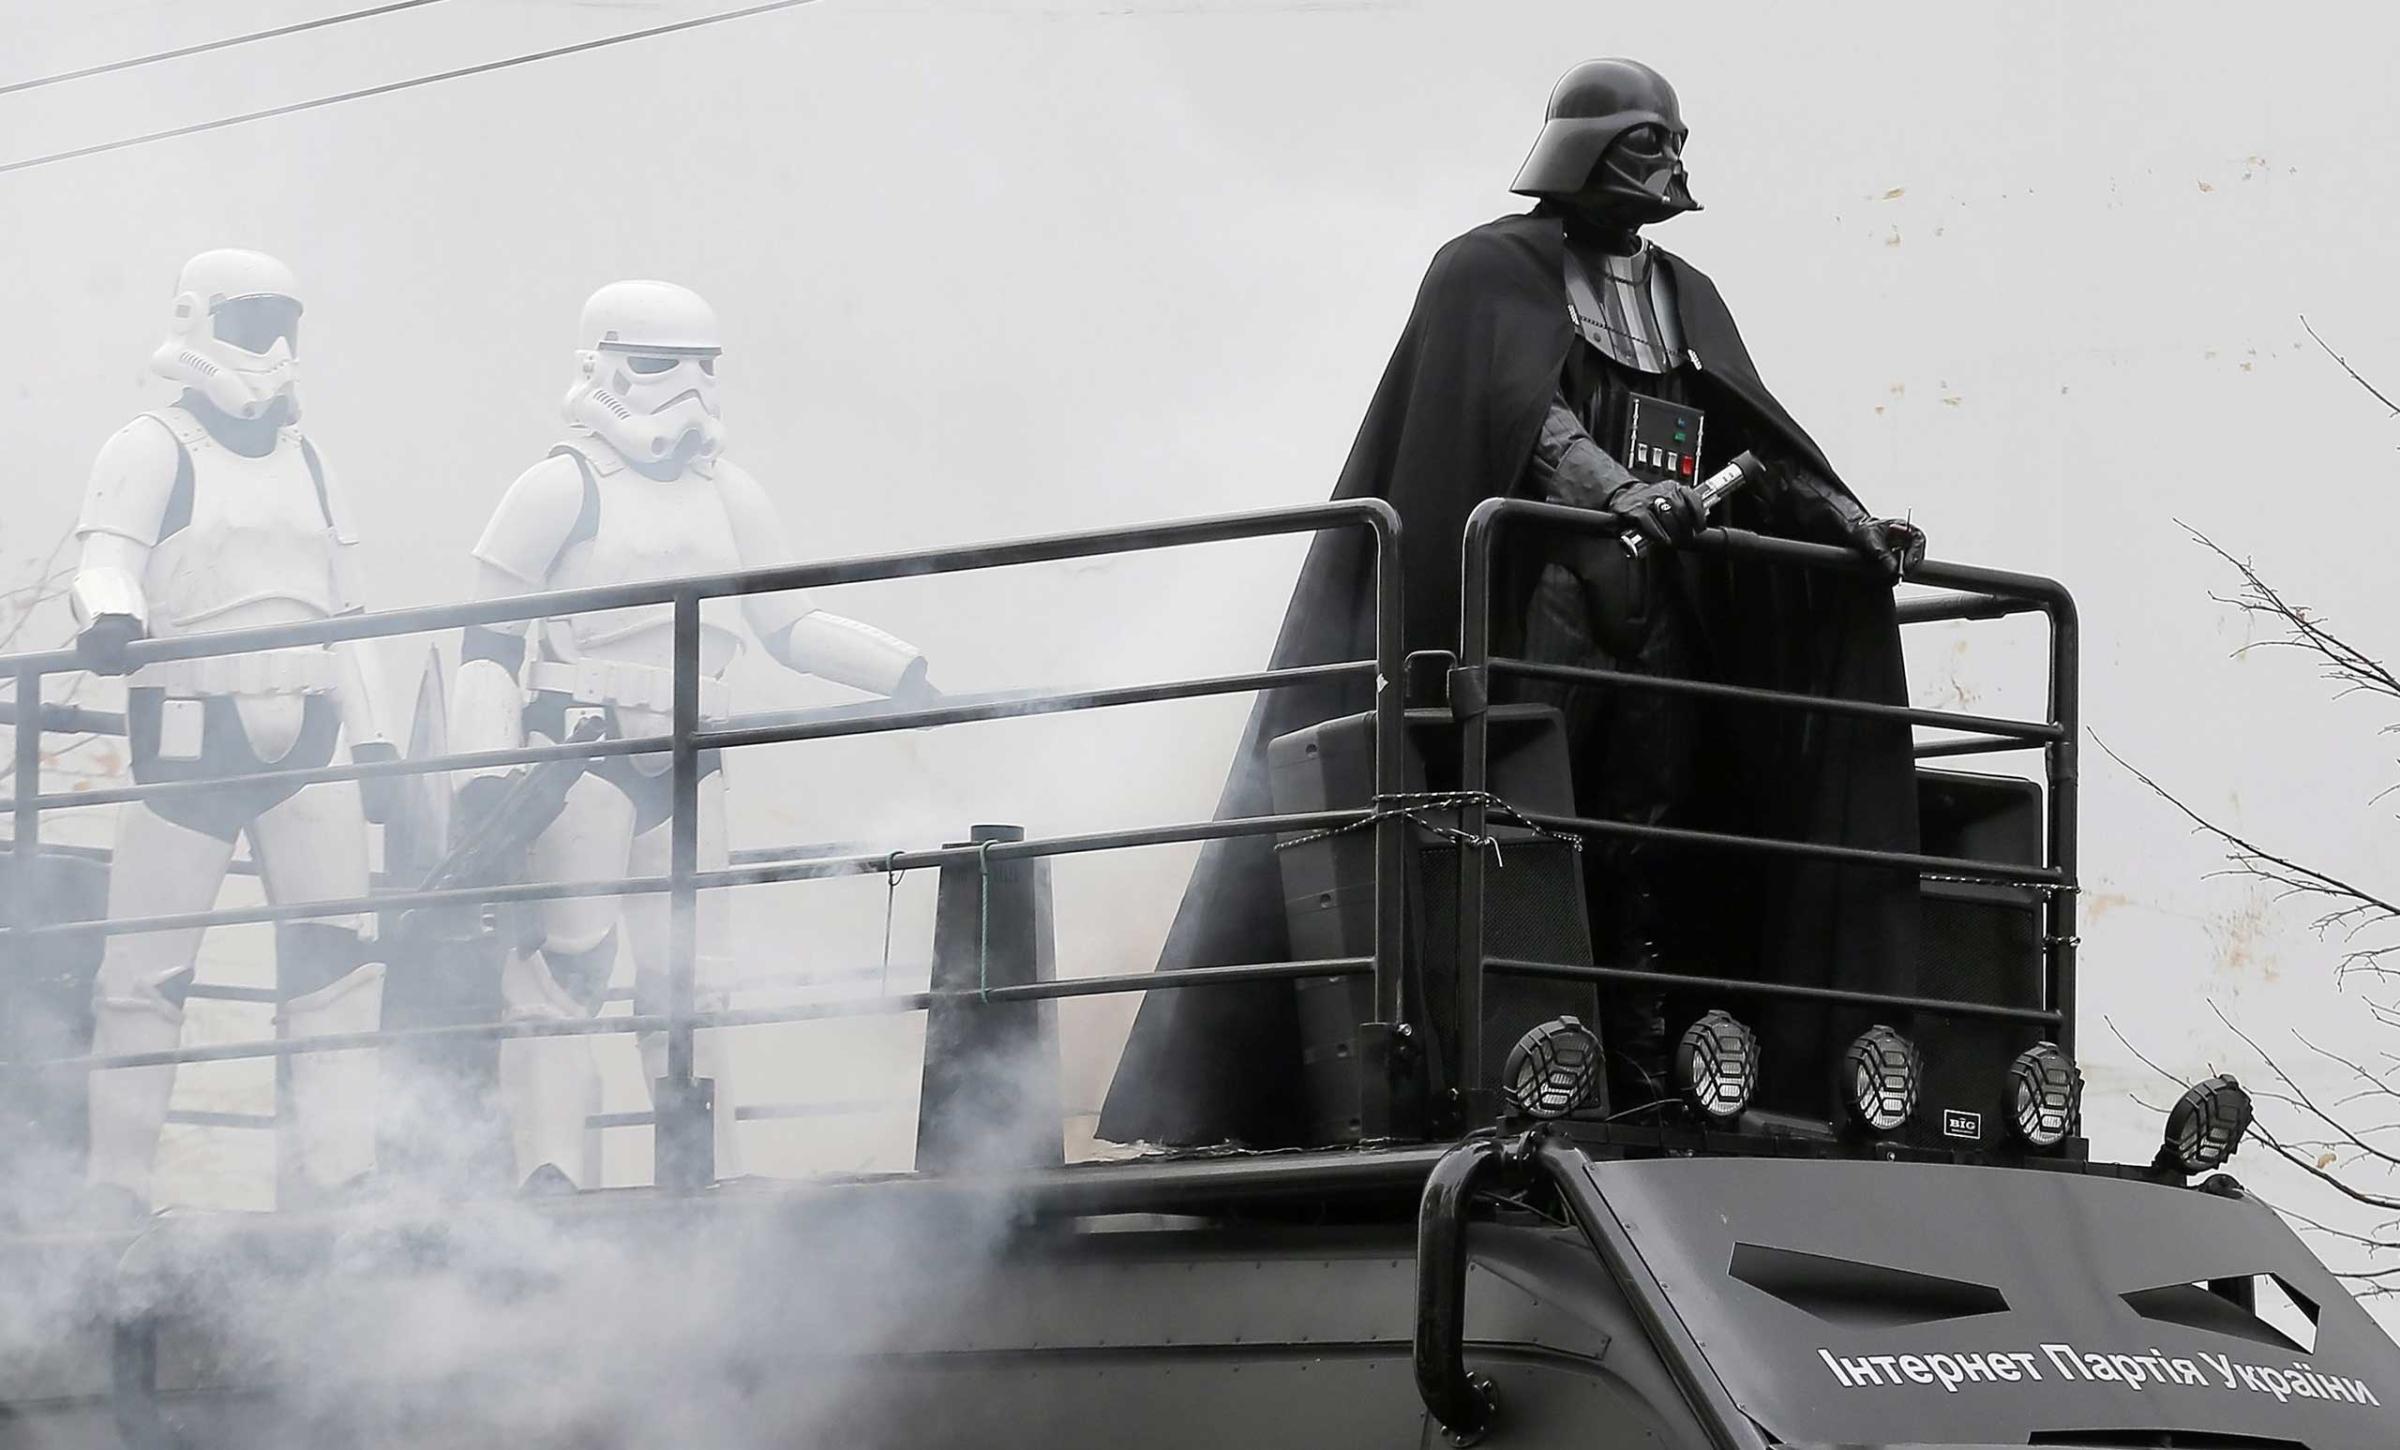 An impersonator of Star Wars character 'Darth Vader' stands on the roof of a van during an election campaign event for the Ukrainian Internet Party. Party members have legally changed their names to resemble 'Star Wars' characters. Kiev, Oct. 21, 2014.